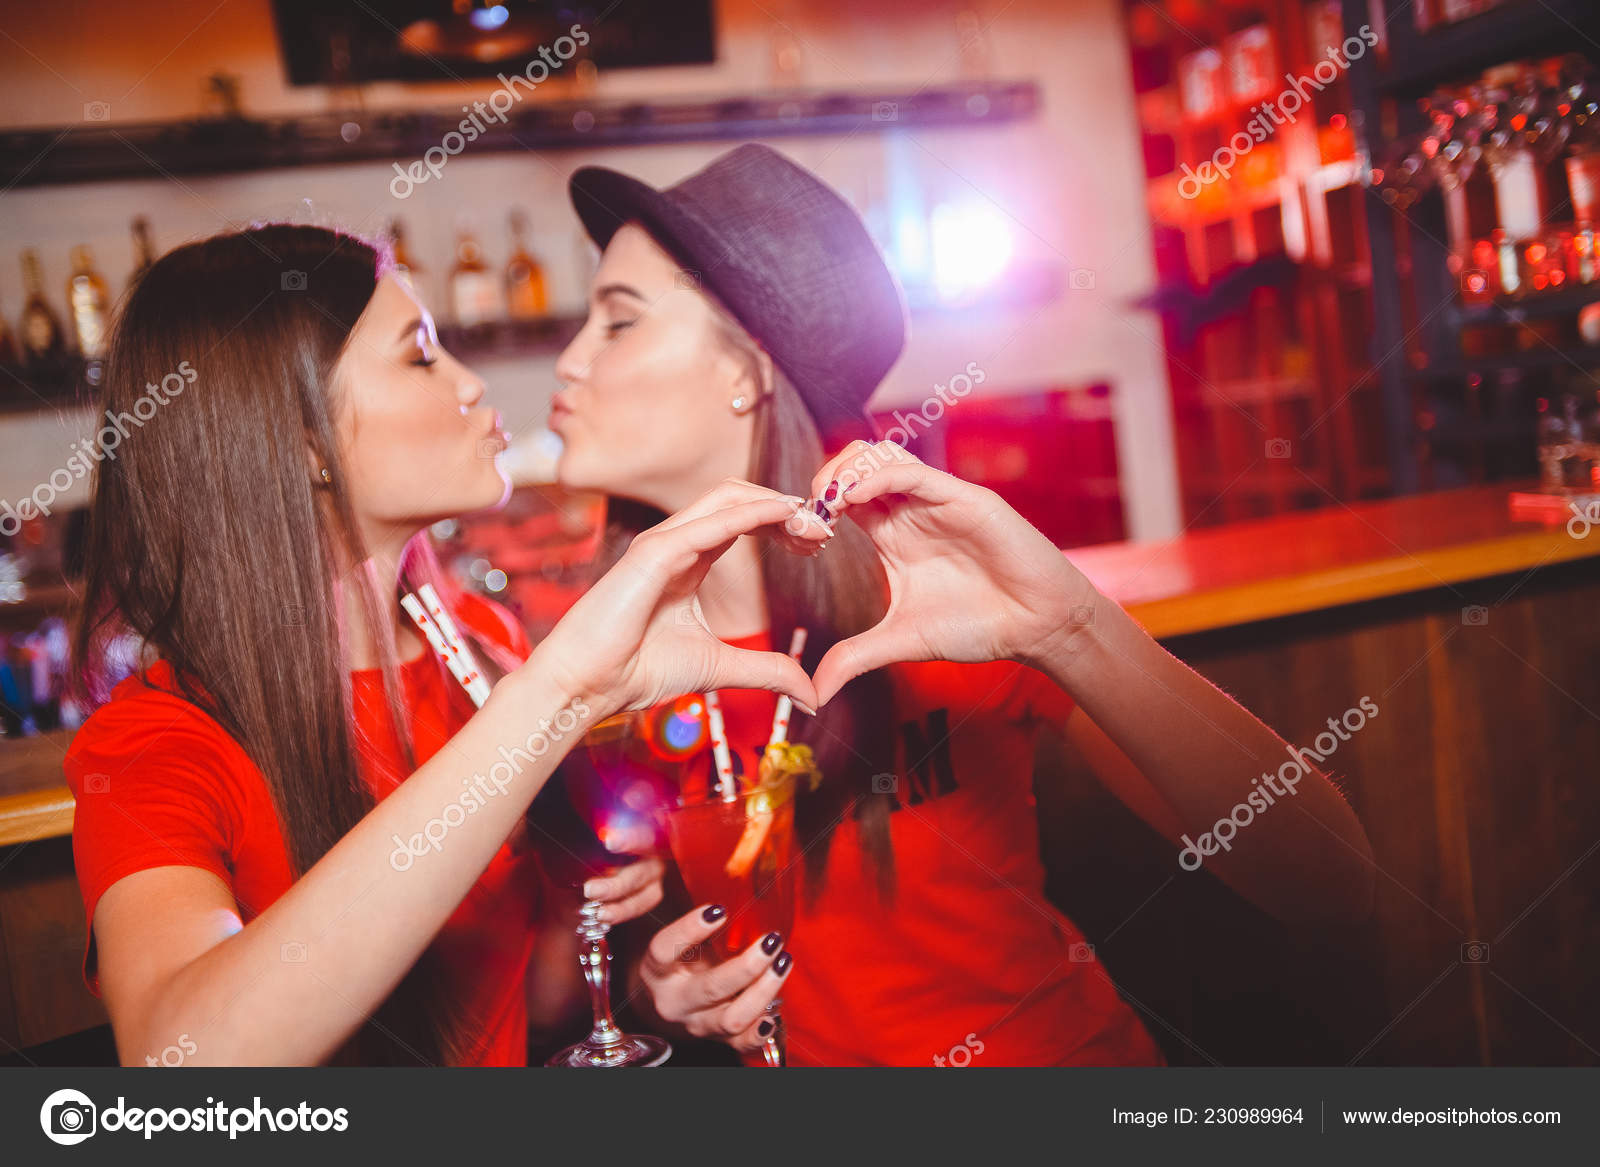 Girl at party goes lesbian